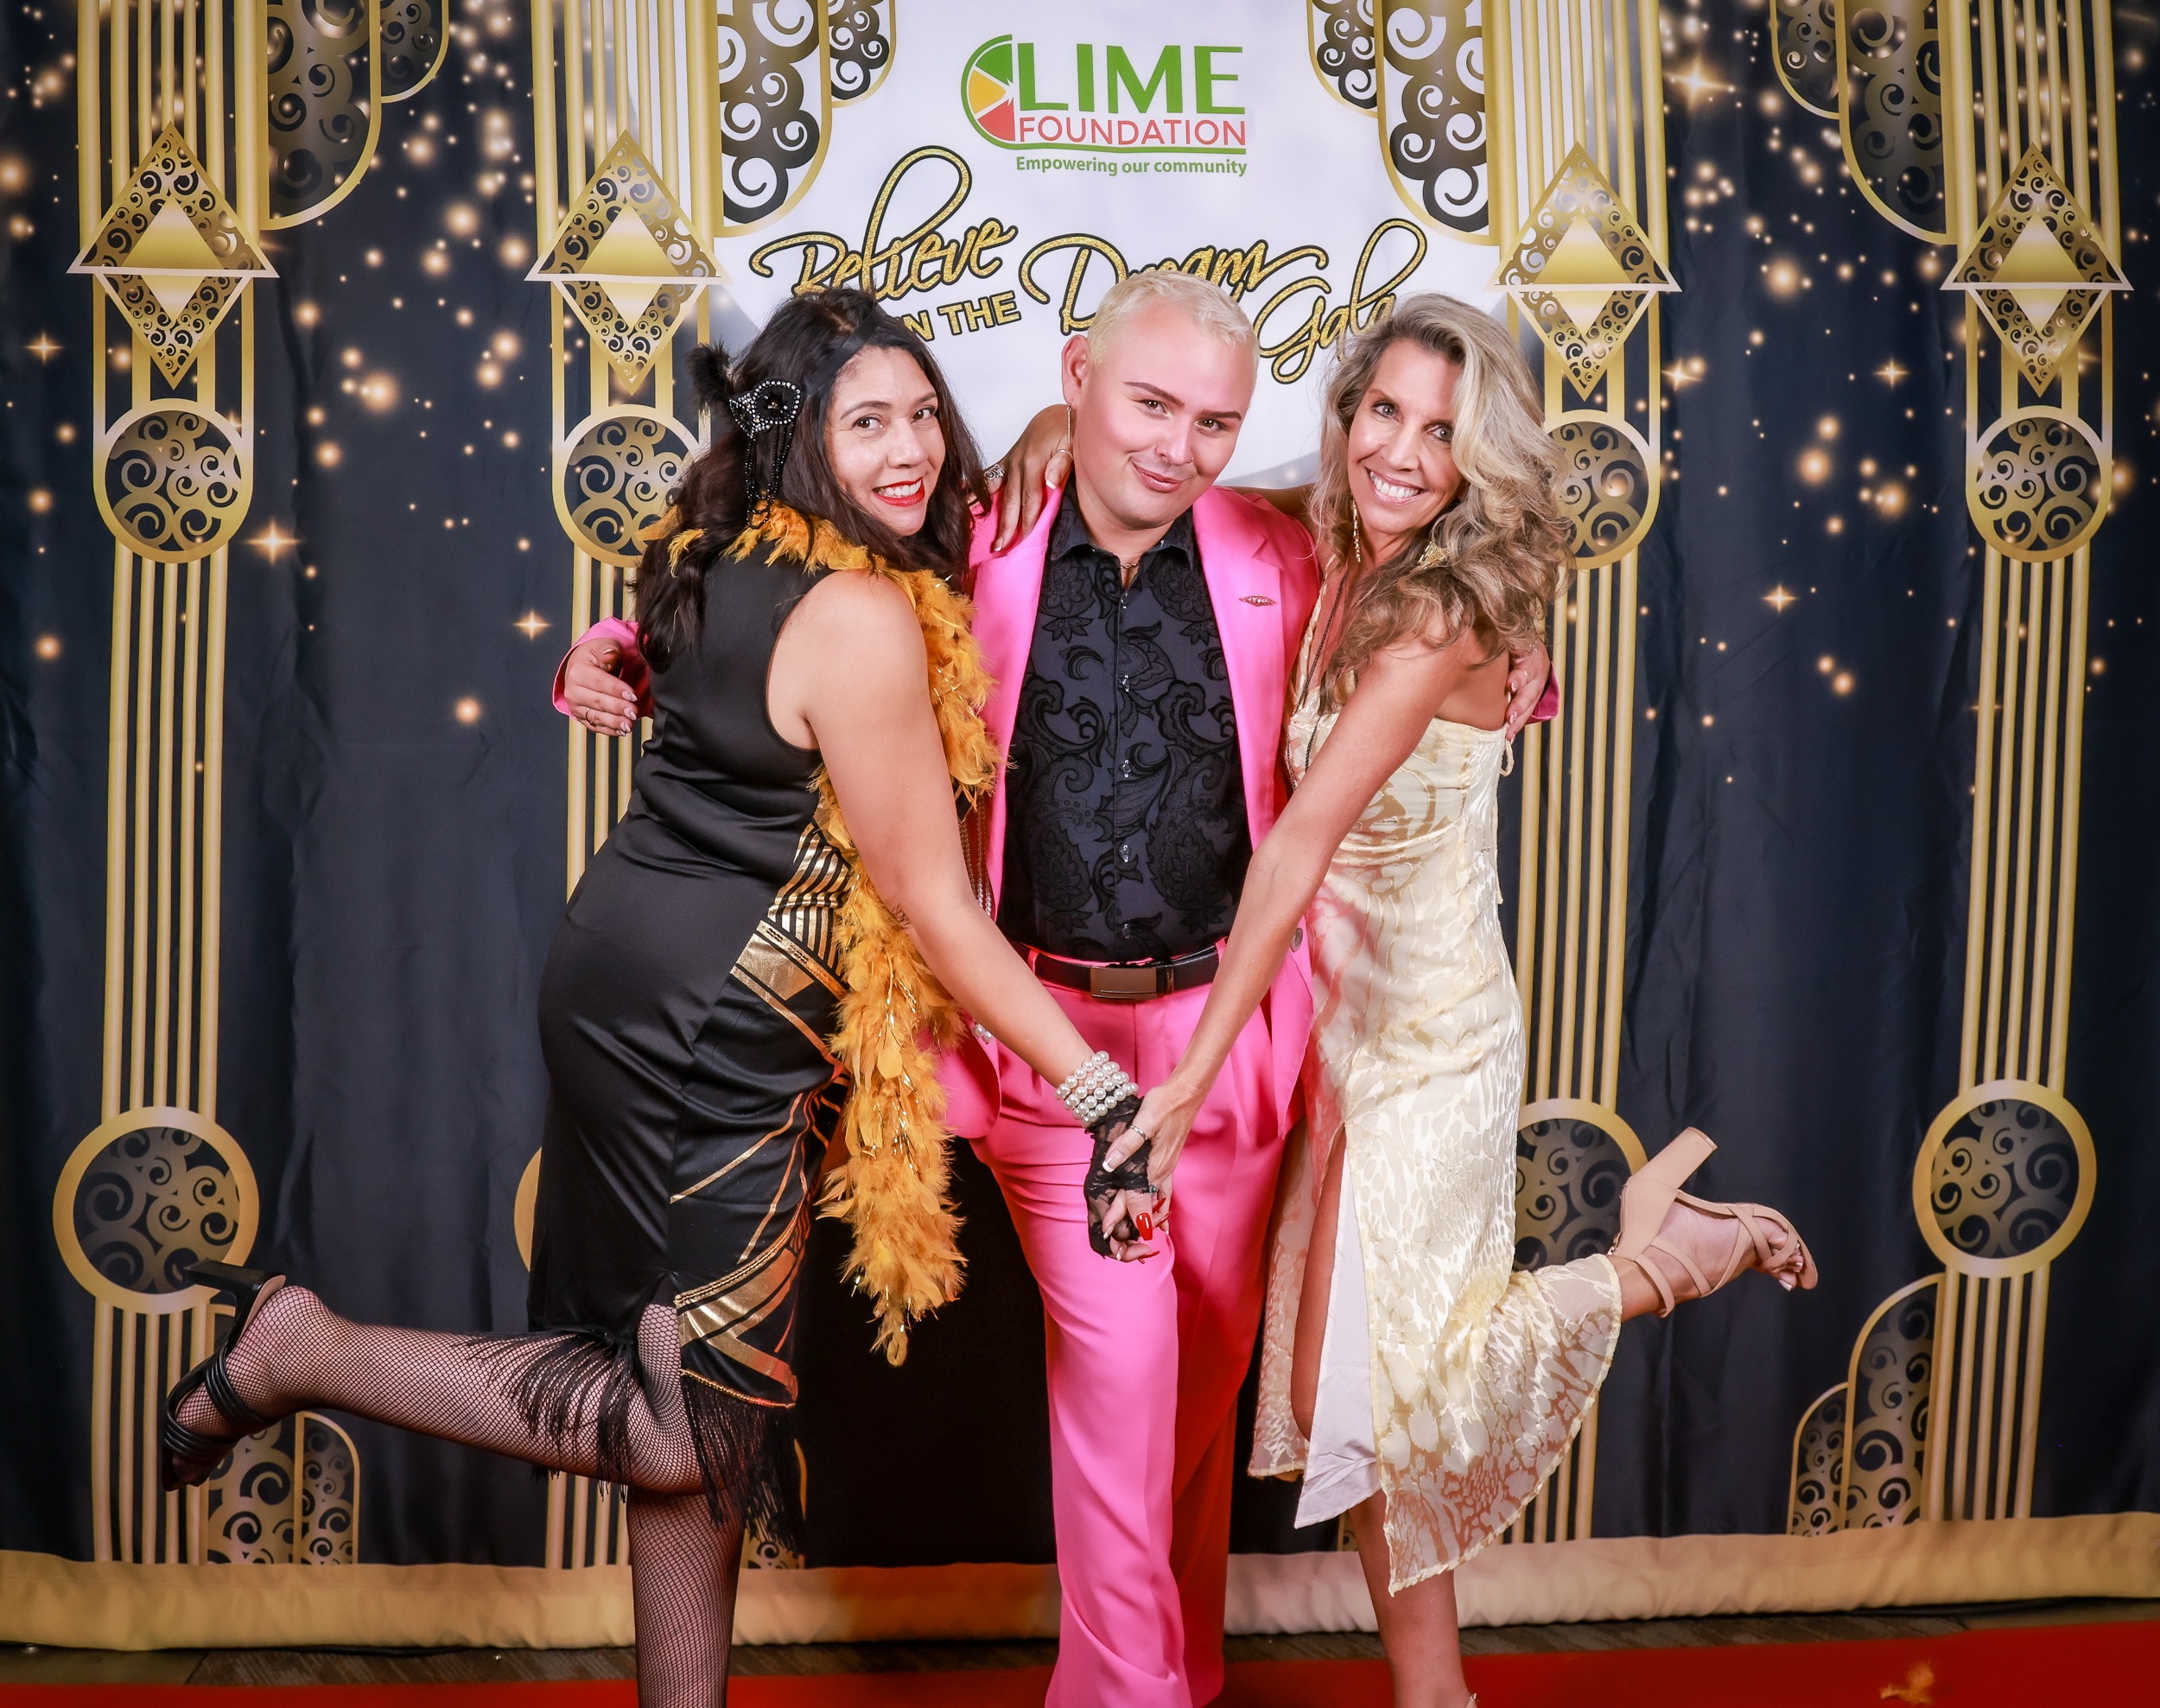 Three people posing for a photo at a gala event hosted by LIME Foundation in Sonoma County.